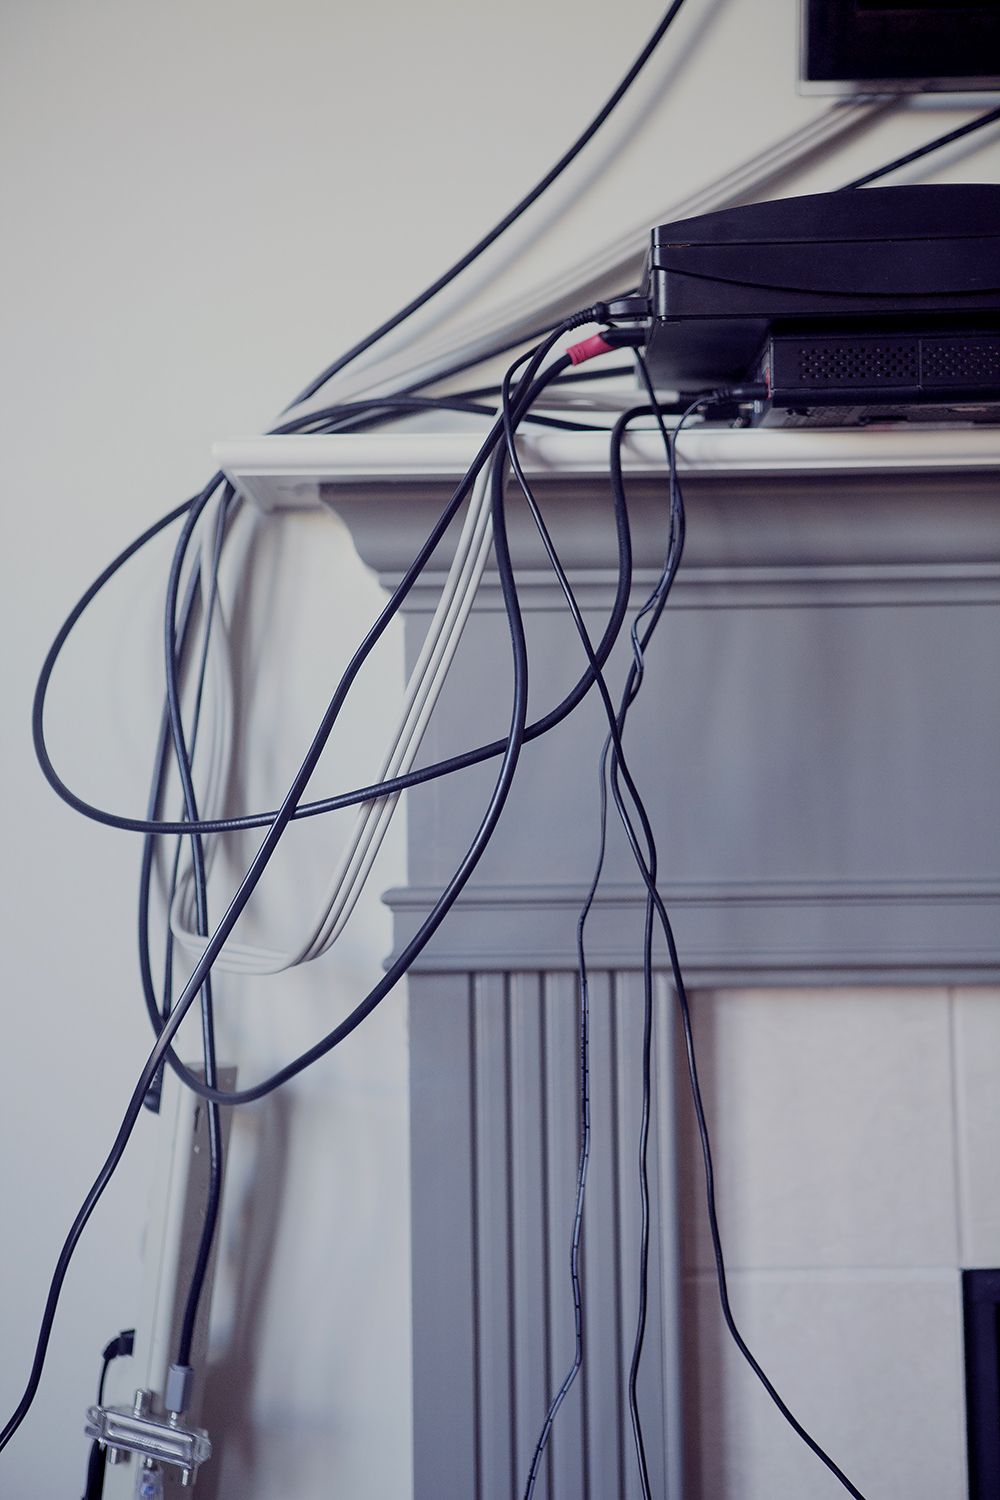 Mounted TV Wire Hiding - How Much Does It Cost?